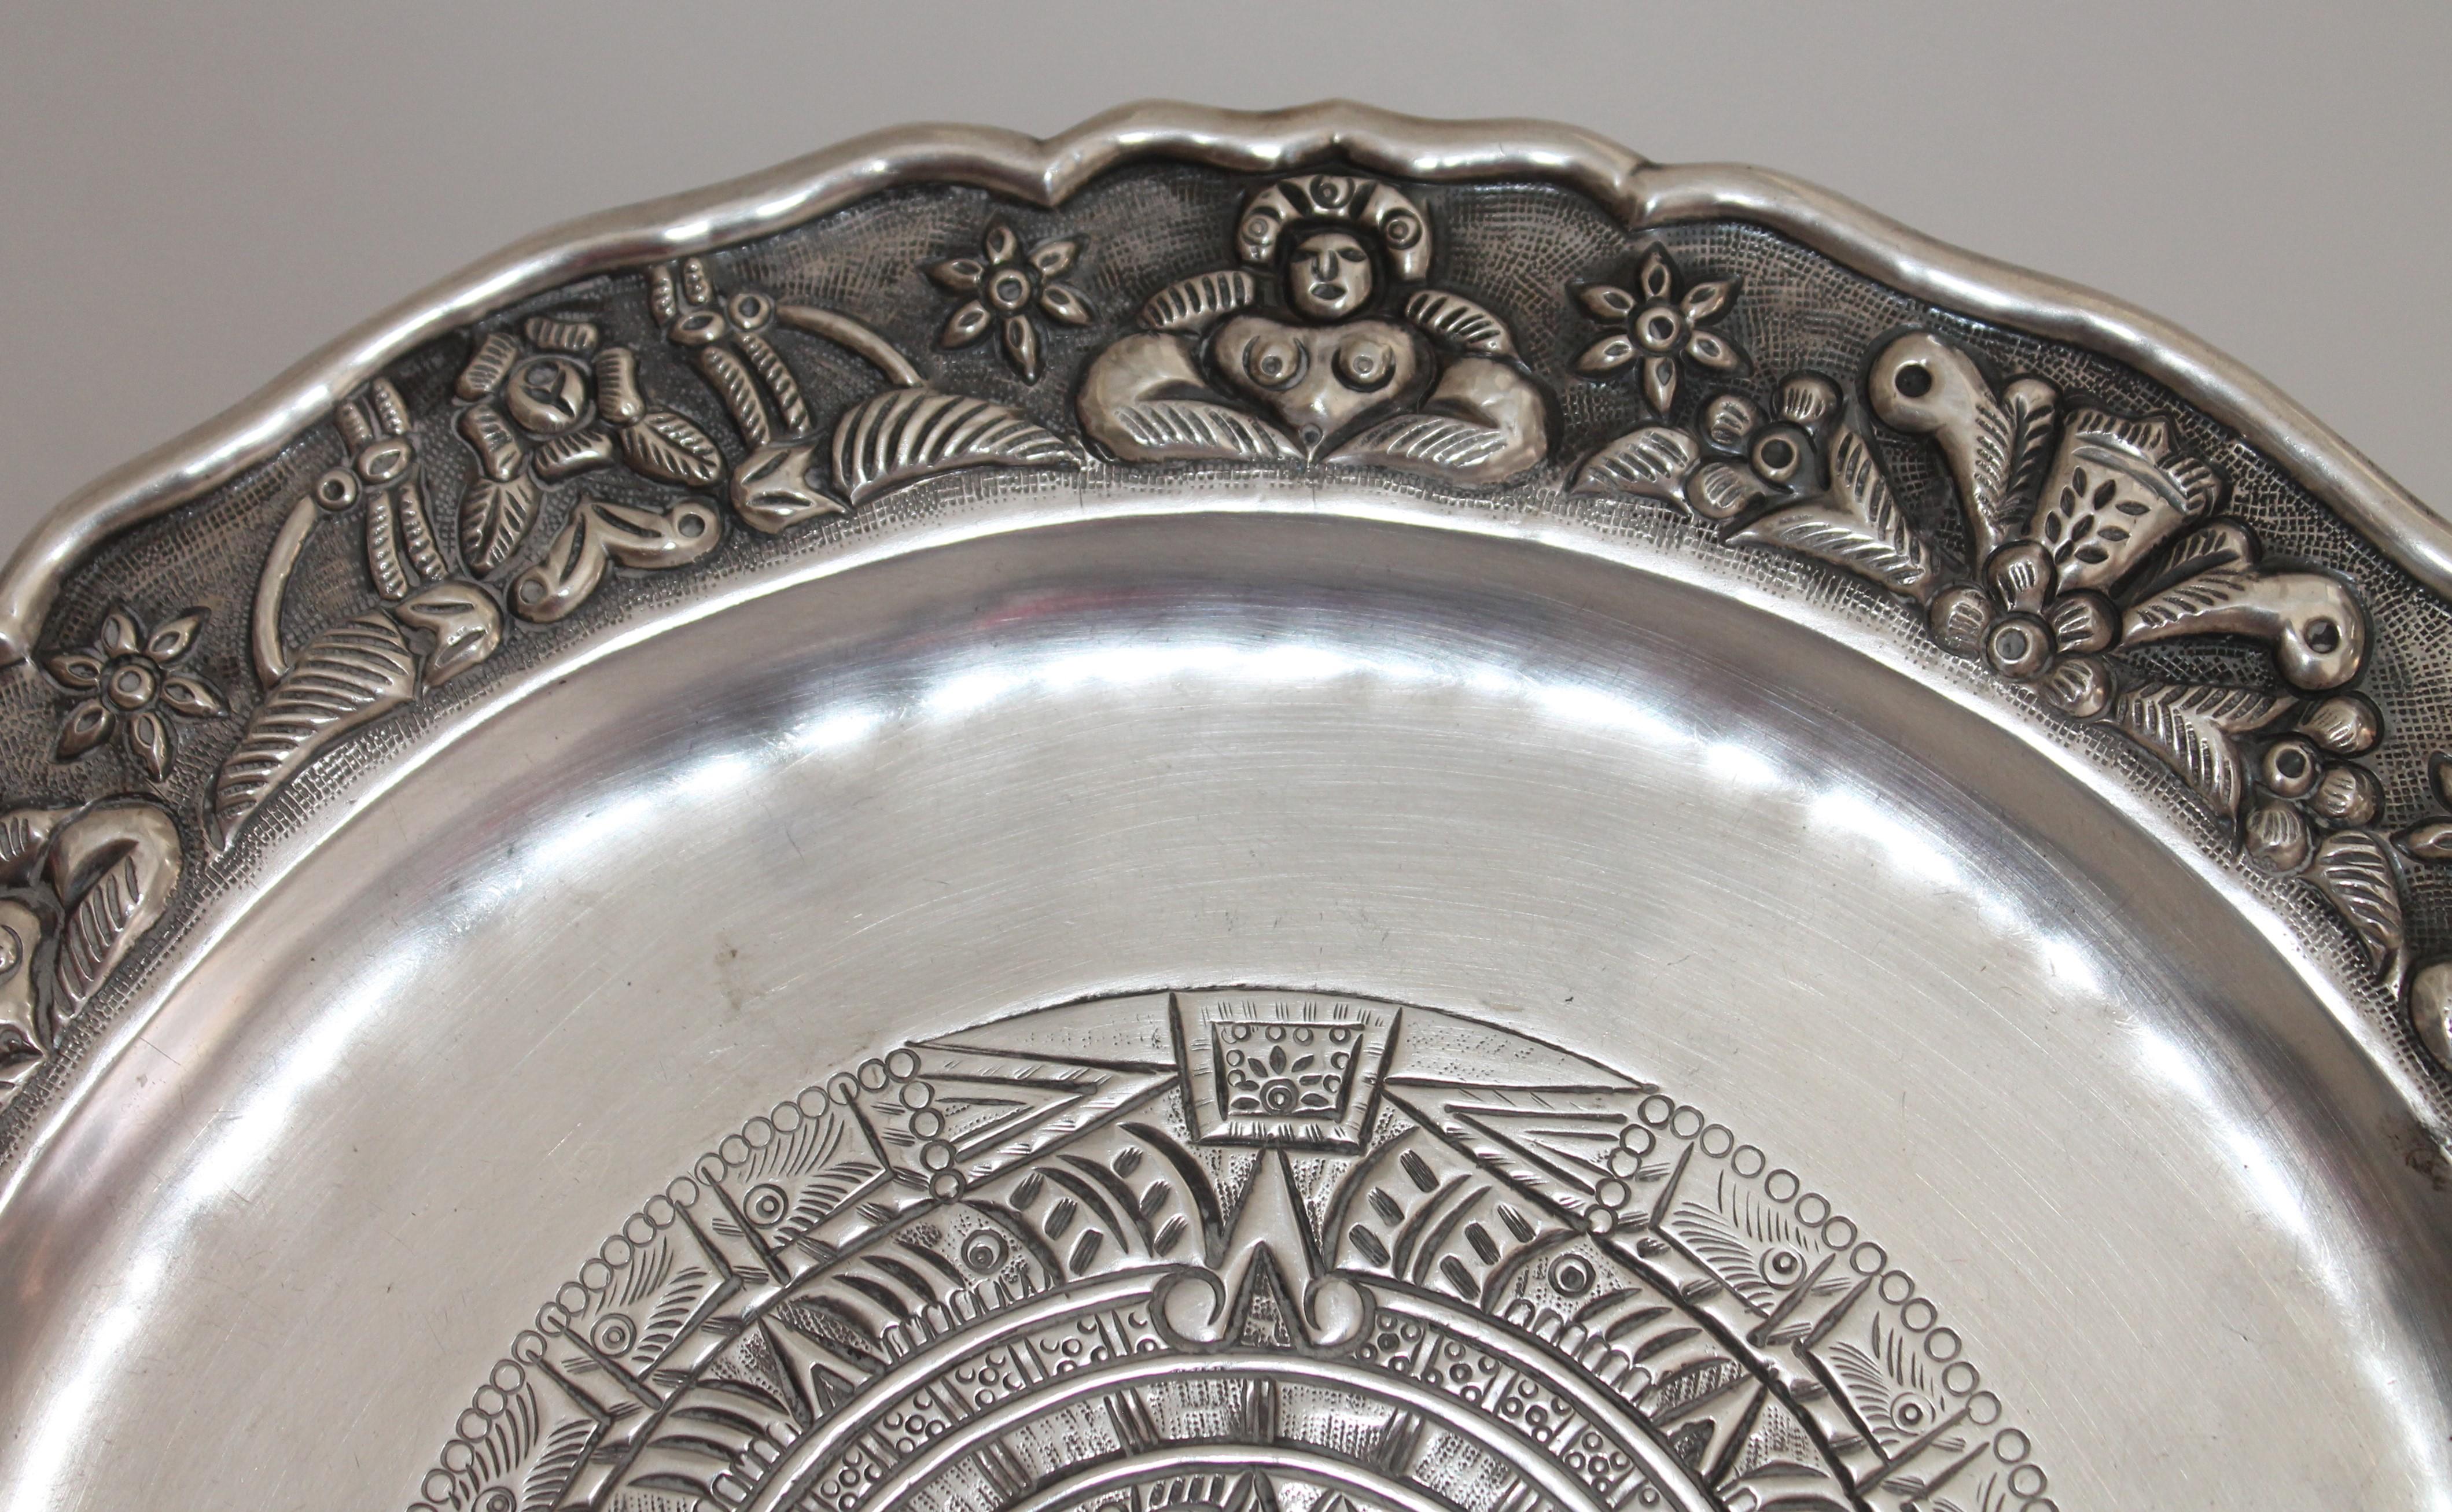 A rare find, Mexican Indian design Mayan sterling plate. Made in Mexico. Beautiful intricate design of the Mayan calendar. Great weight for the sterling silver plate.
Maciel based in Mexico manufactured high quality silver hollow ware and a limited